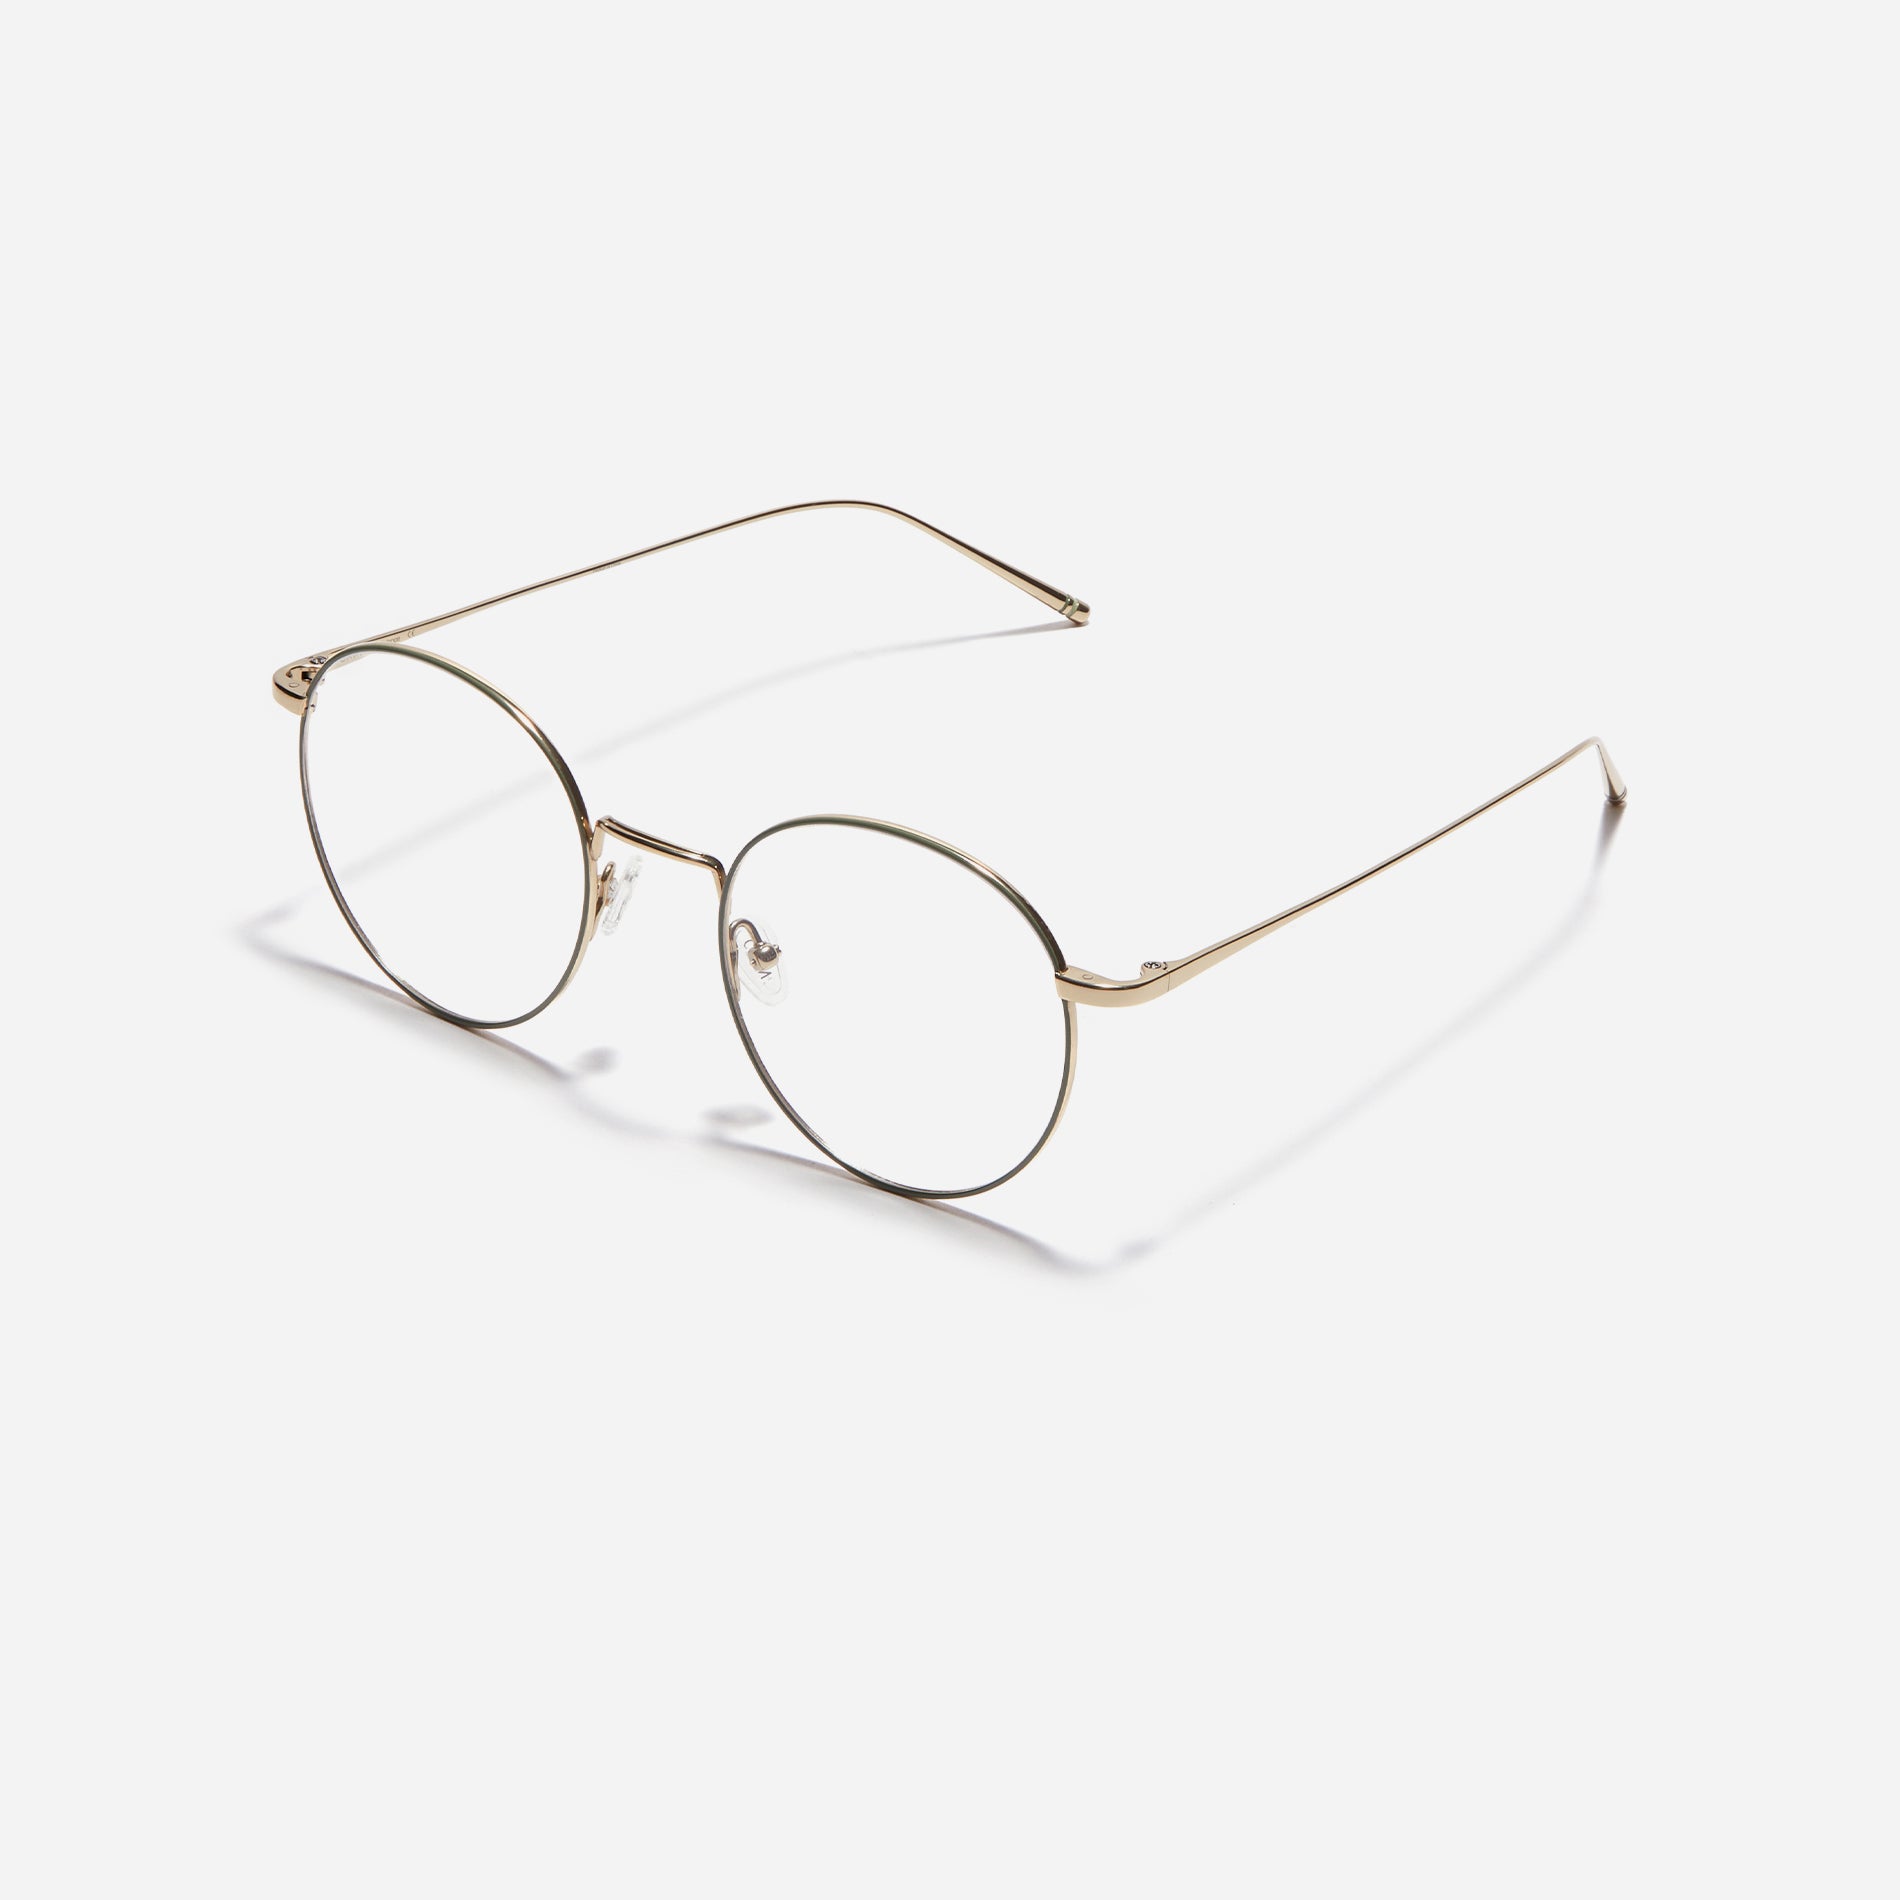 Round-shaped eyeglasses that naturally complement all face shapes. Crafted entirely from titanium, the frame provides exceptional durability and featherweight comfort, while its design adds a touch of casual charm to one's daily style.